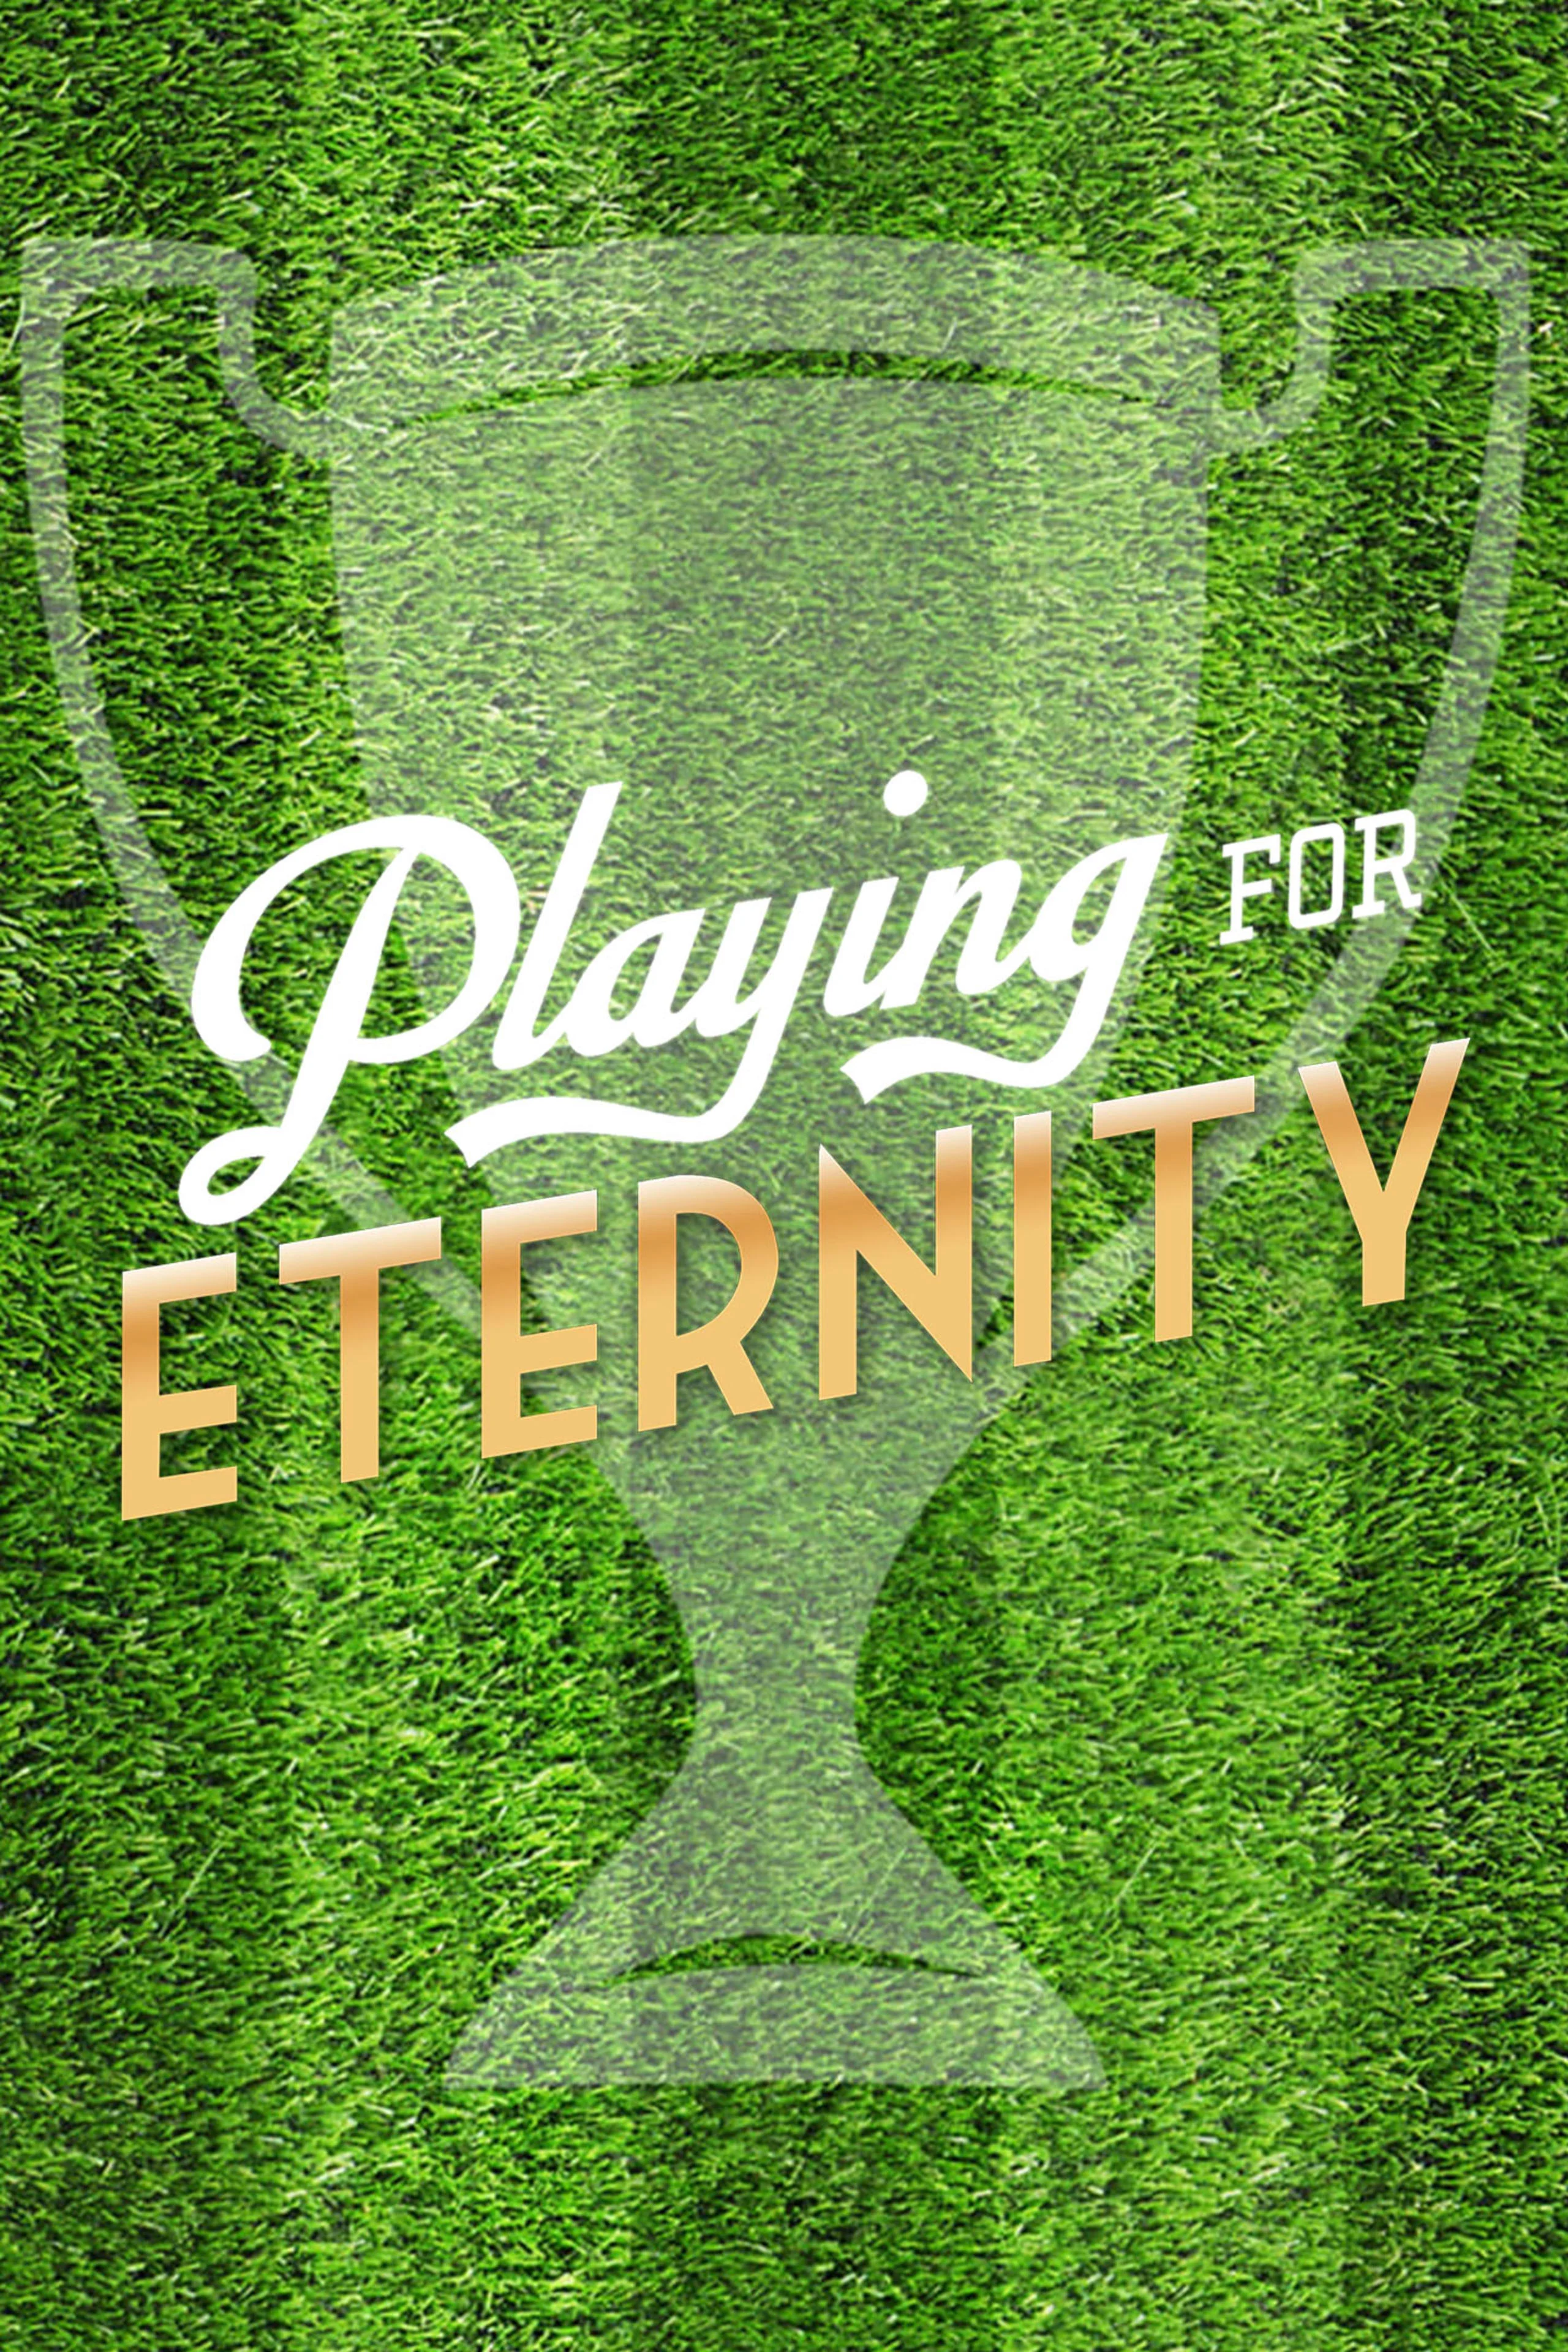 Playing for Eternity